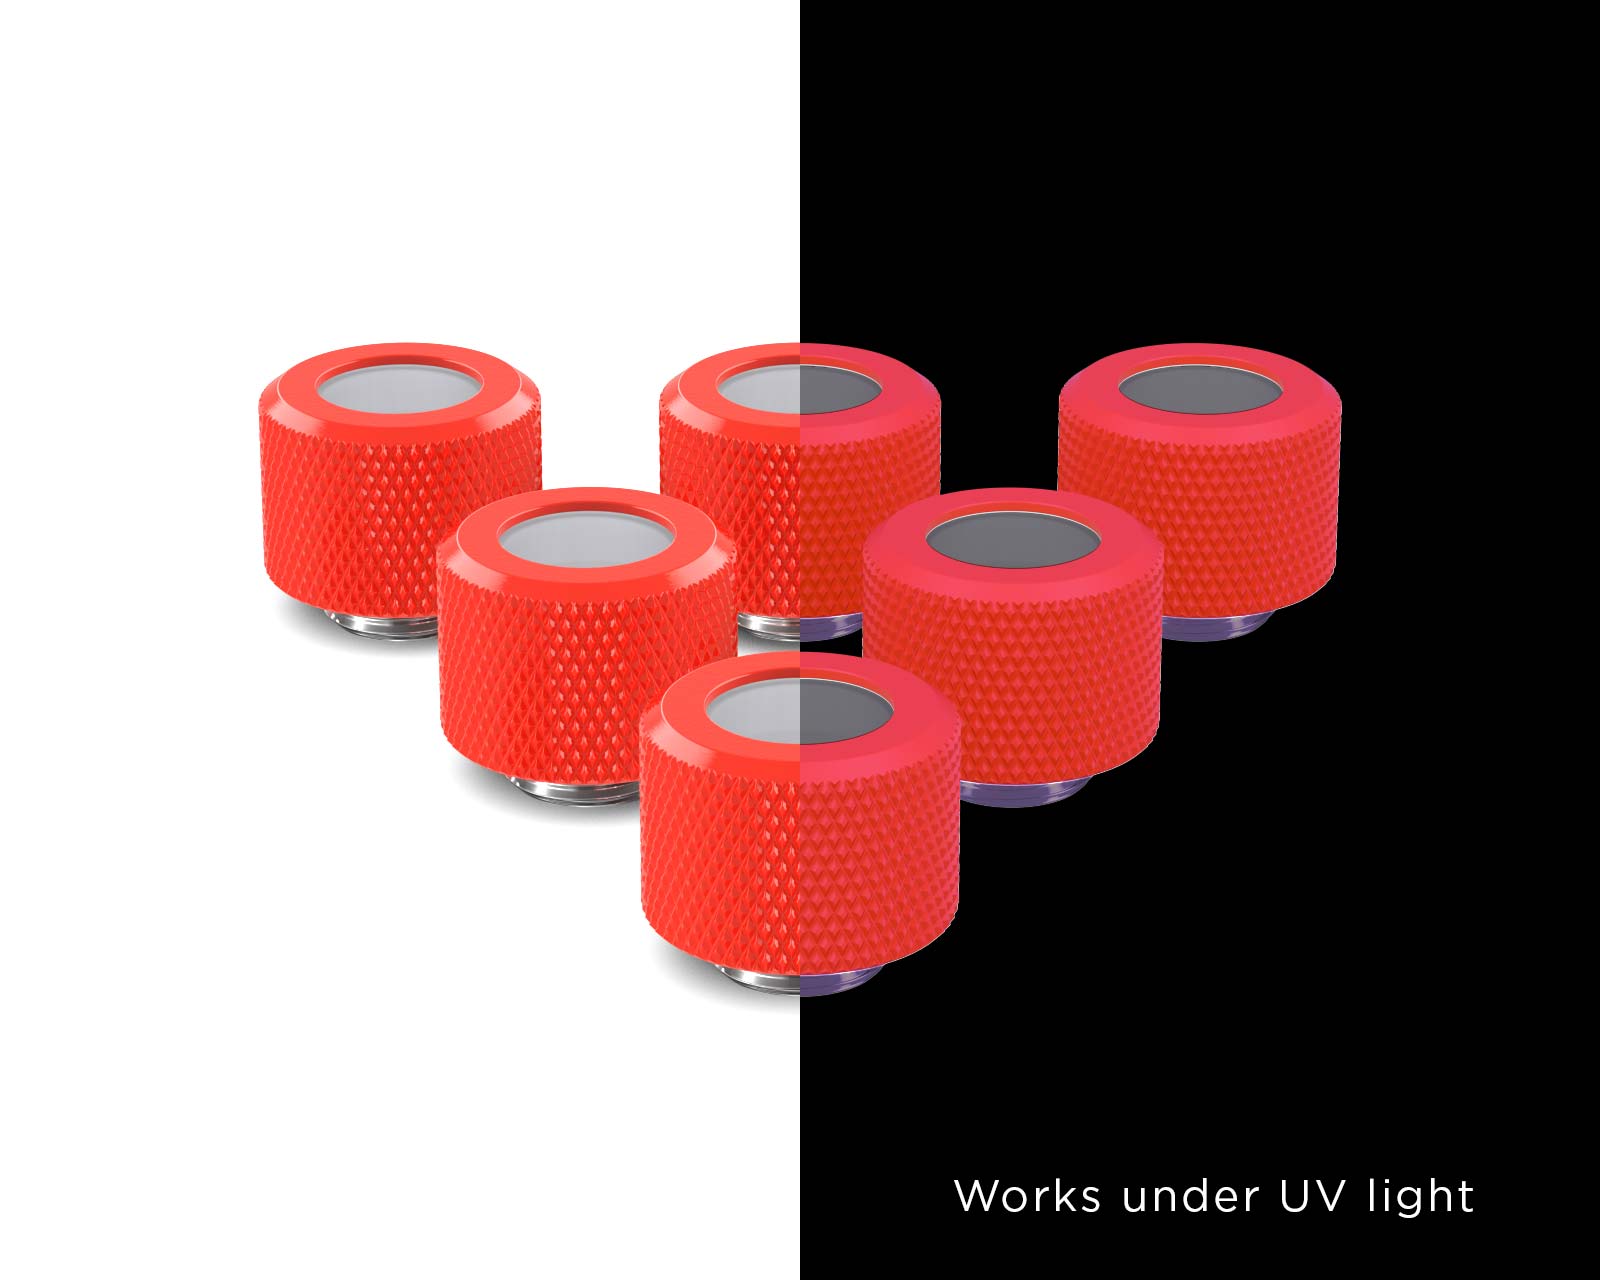 PrimoChill 12mm OD Rigid SX Fitting - 6 Pack - PrimoChill - KEEPING IT COOL UV Red